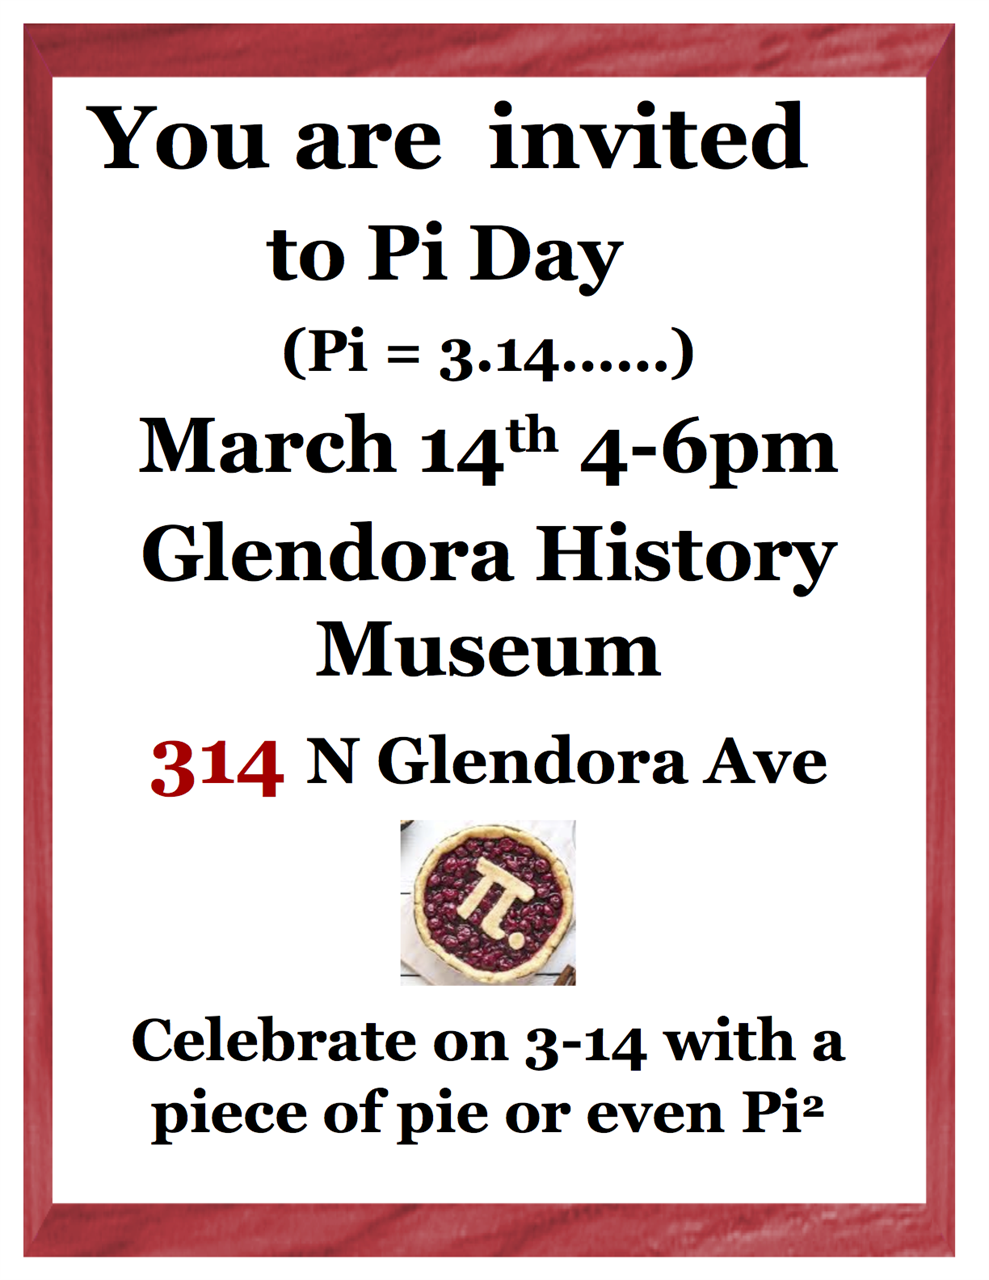 Image of black serif text surrounded by a red border. THe text reads, " You are invited to Pi Day (Pi = 3.14...), March 14th 4-6pm, Glendora History Museum, 314 N Glendora Ave, Celebrate on 3-14 with a piece of pie of even Pi suared."